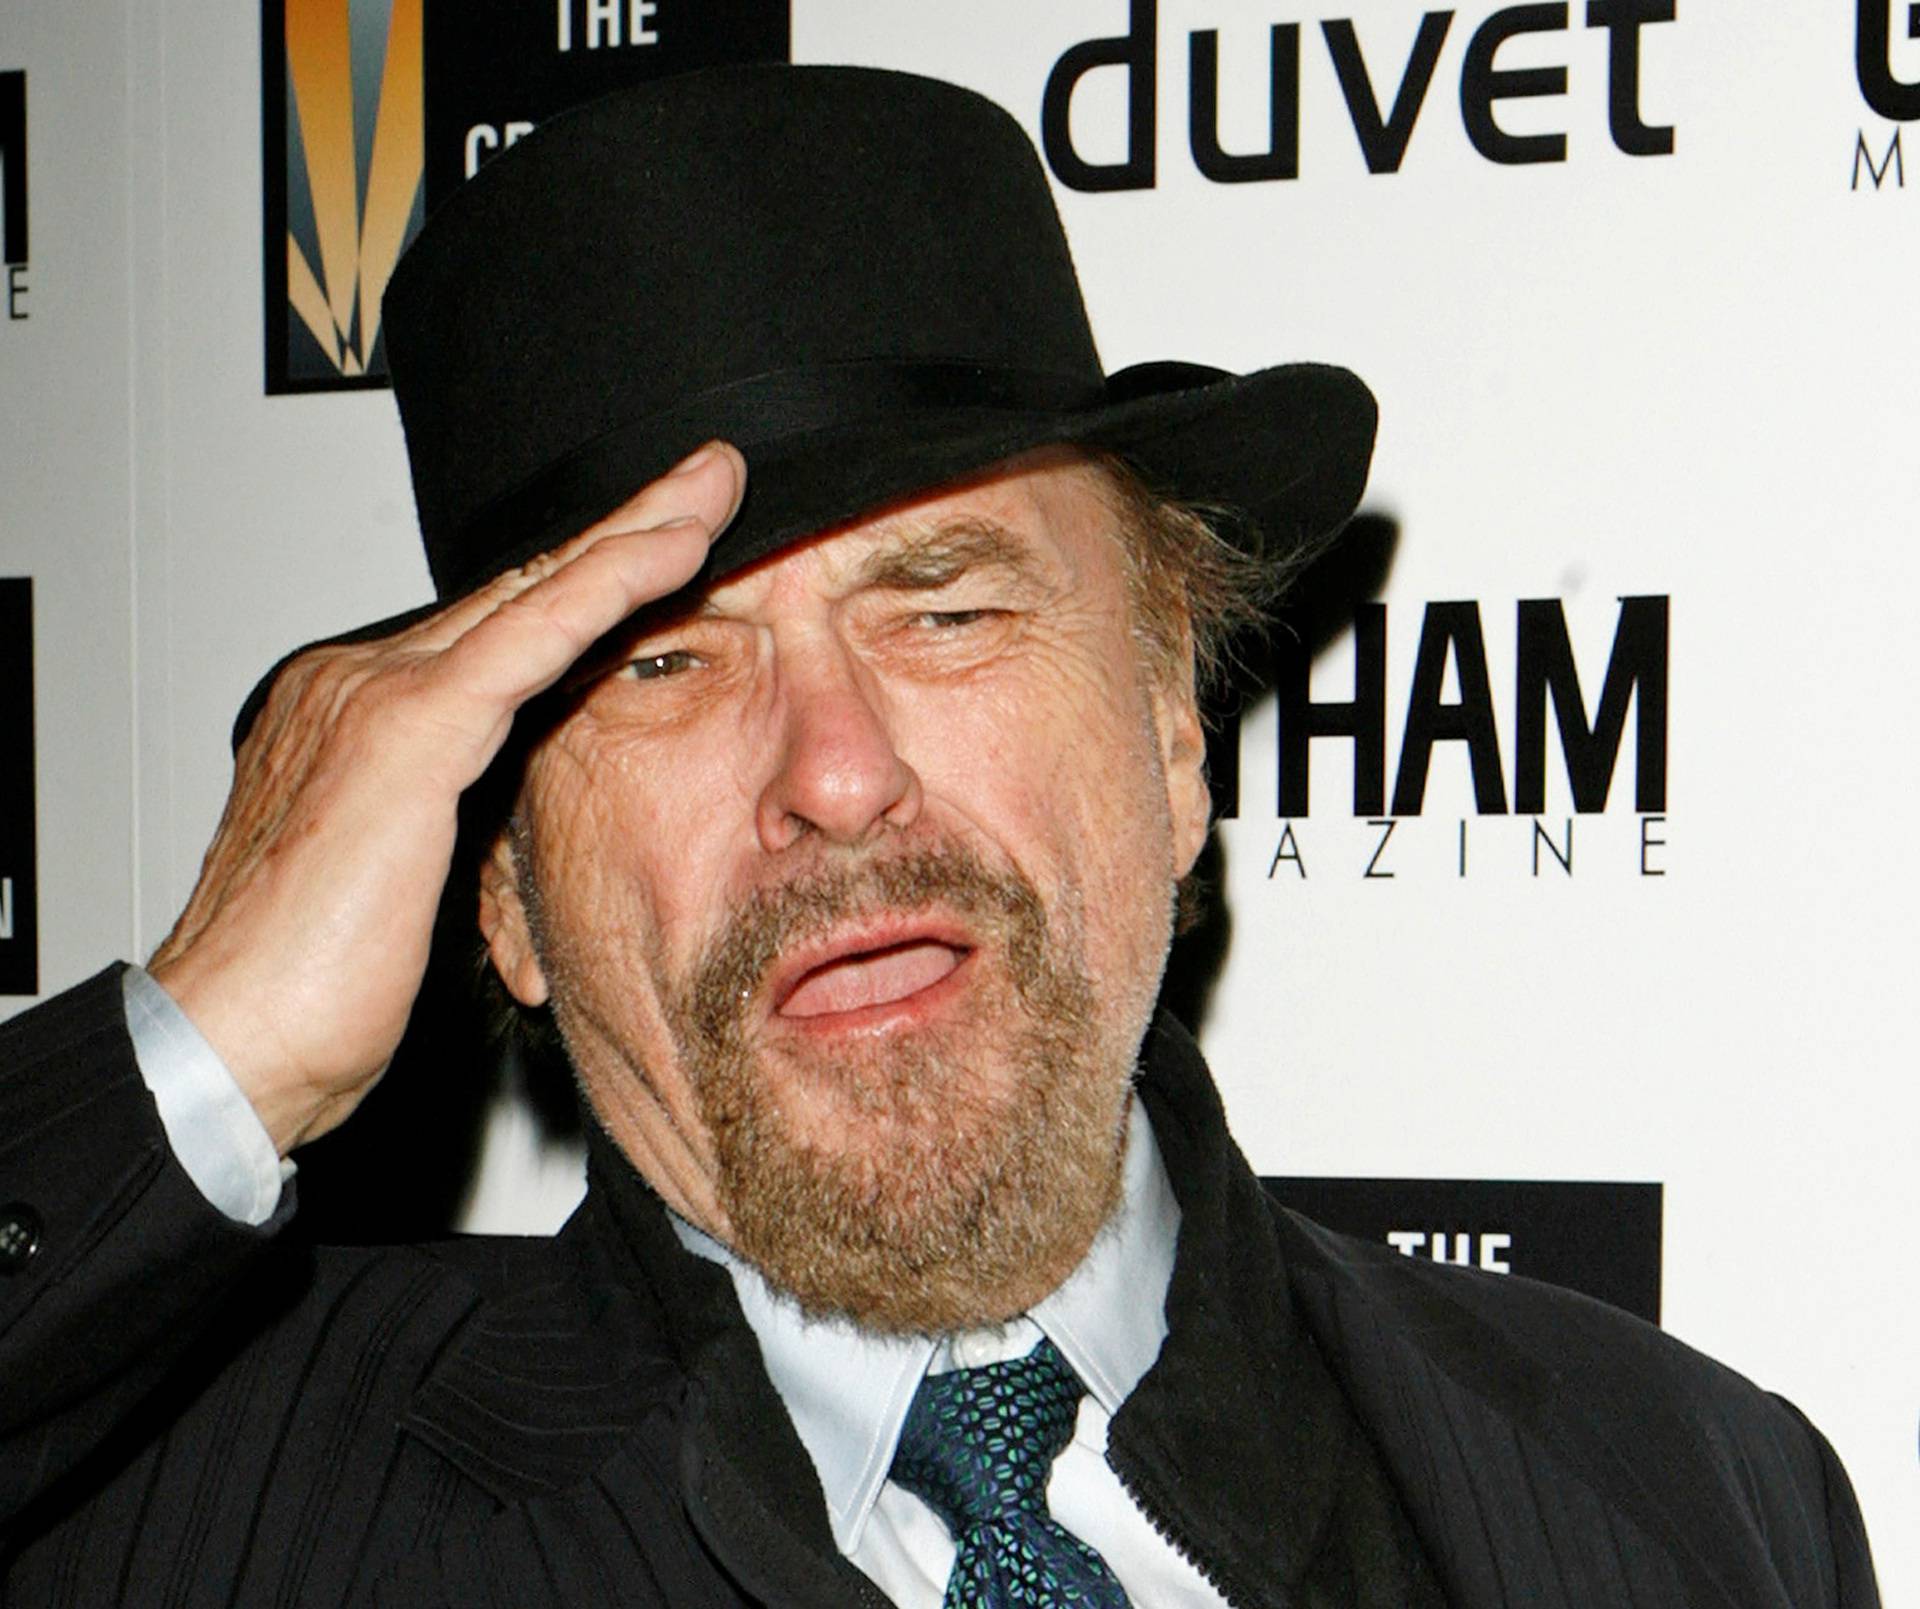 FILE PHOTO: Actor Rip Torn arrives to attend a Creative Coalition Awards Gala held to honor individuals for their commitment to champion social welfare issues in New York